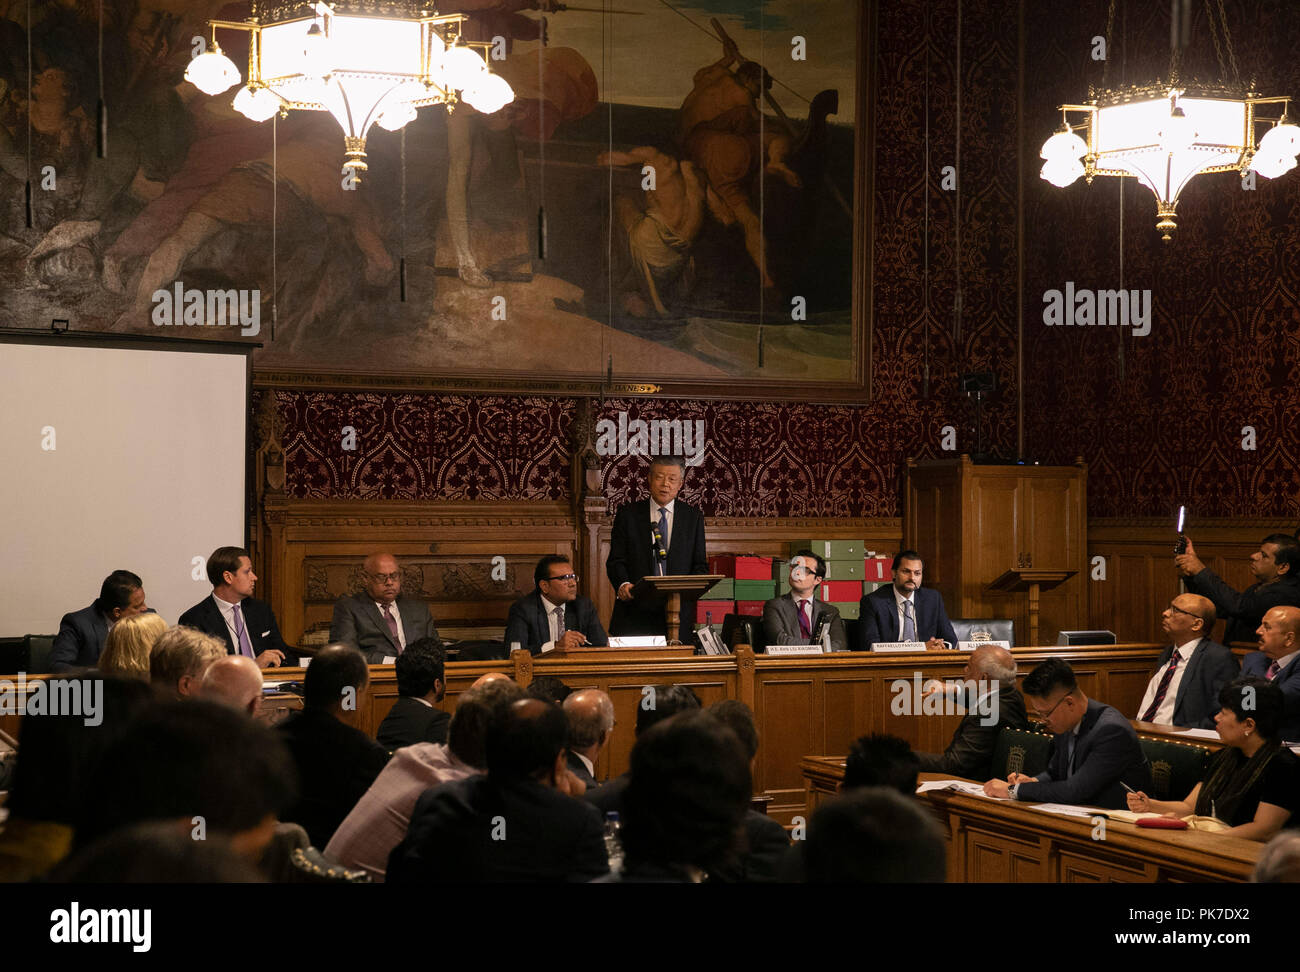 (180911) -- LONDON, Sept. 11, 2018 (Xinhua) -- Chinese Ambassador to Britain Liu Xiaoming (C) delivers a keynote speech during the launching ceremony of the All-Party Parliamentary Group (APPG) for the Belt and Road Initiative (BRI) and China-Pakistan Economic Corridor (CPEC), in London, Britain on Sept. 10, 2018. Stock Photo